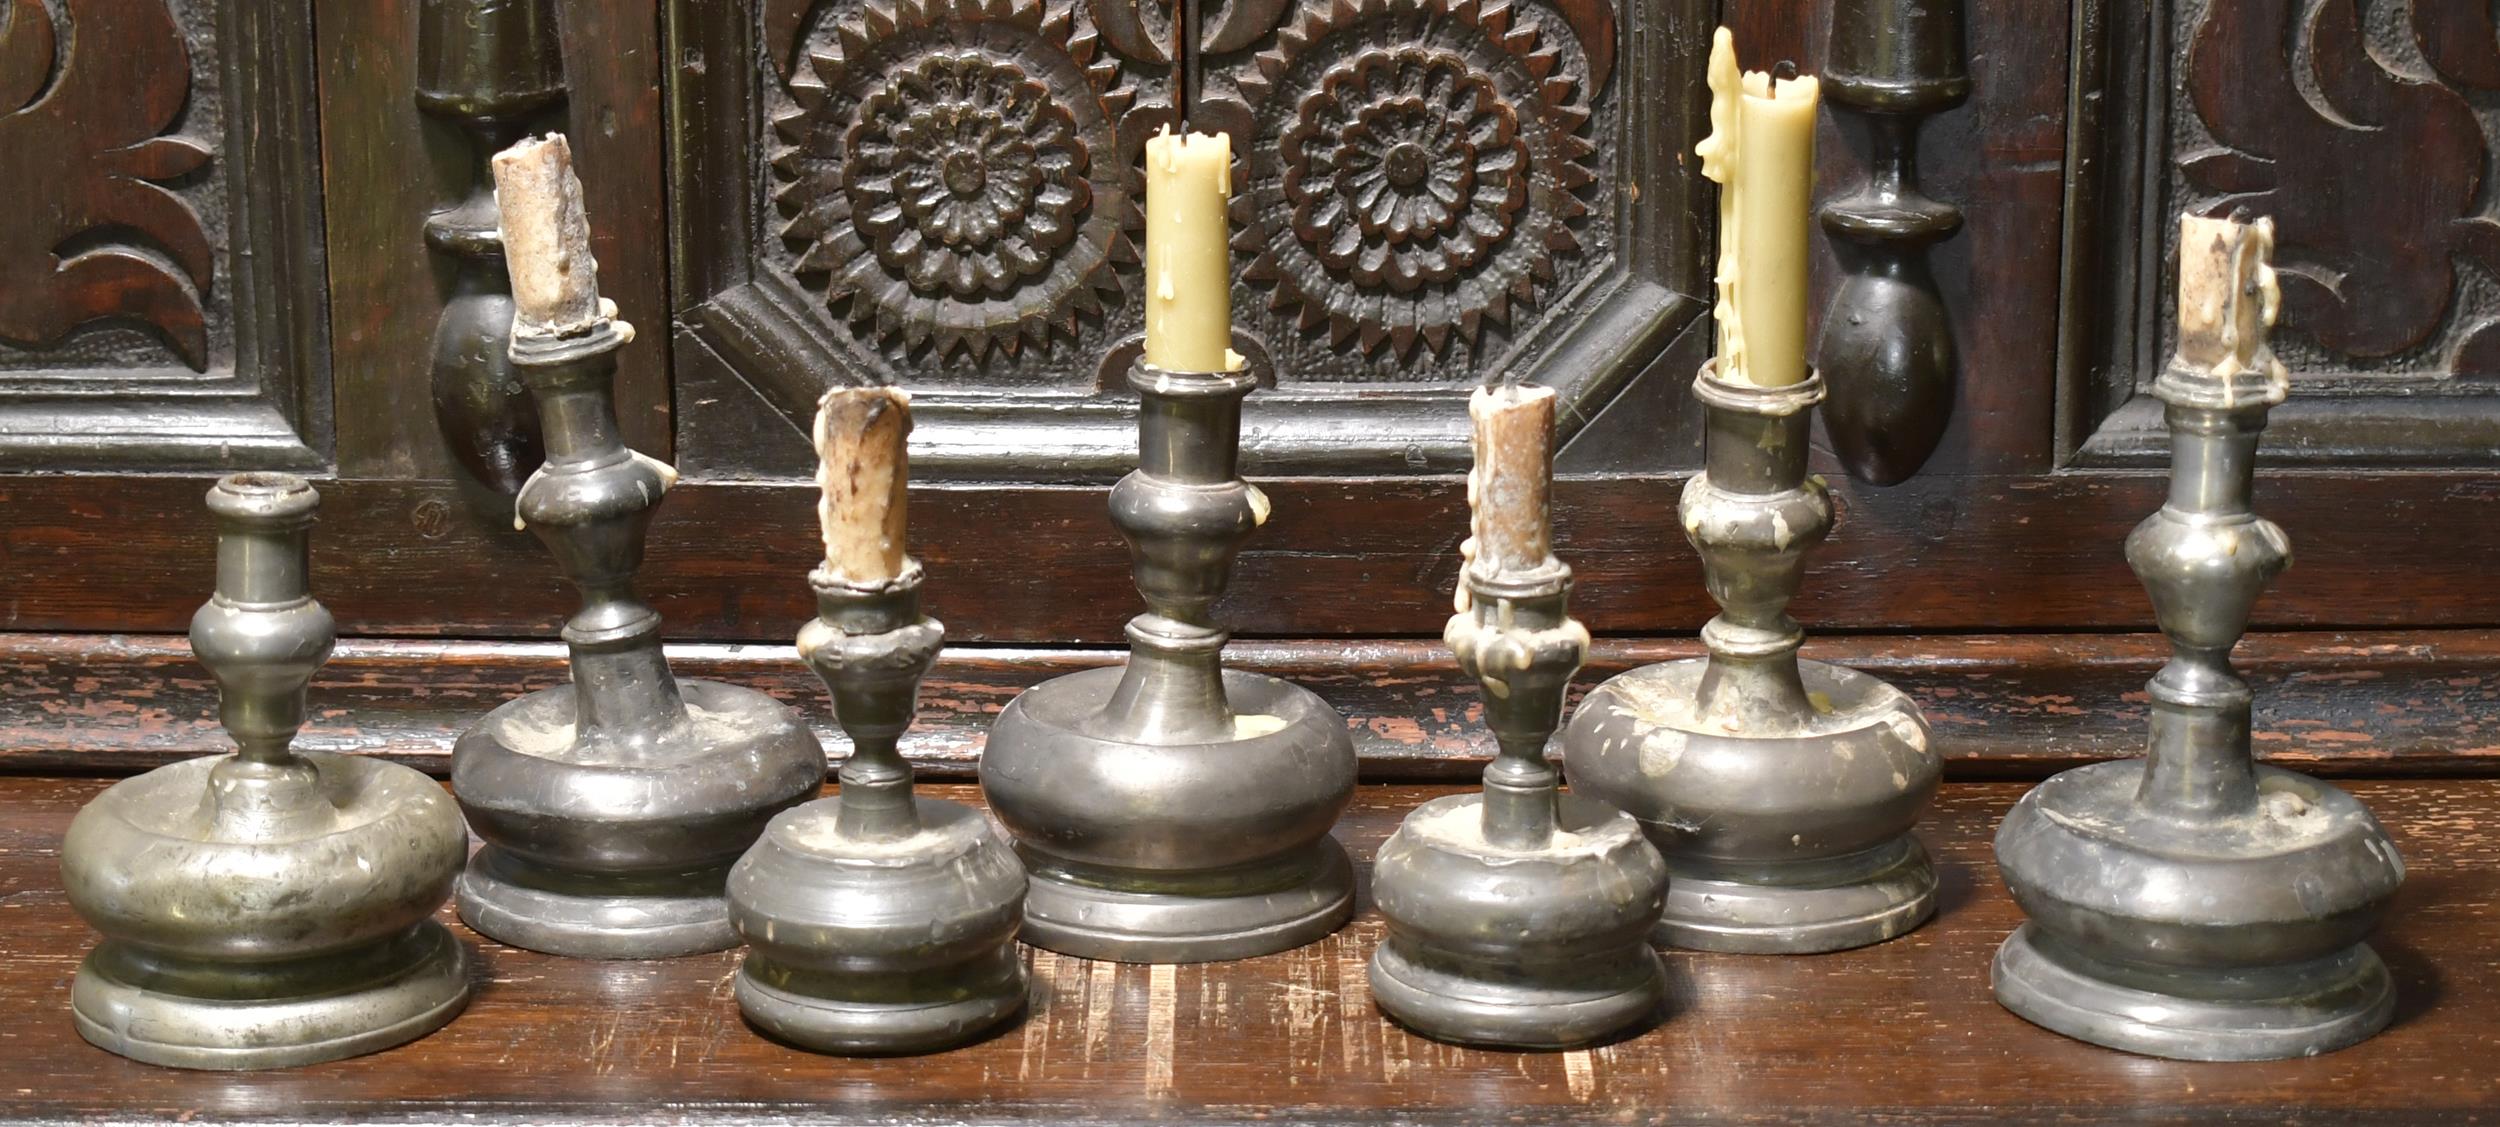 GROUP OF SMALL 17TH C PEWTER CANDLESTICKS  29e1e6